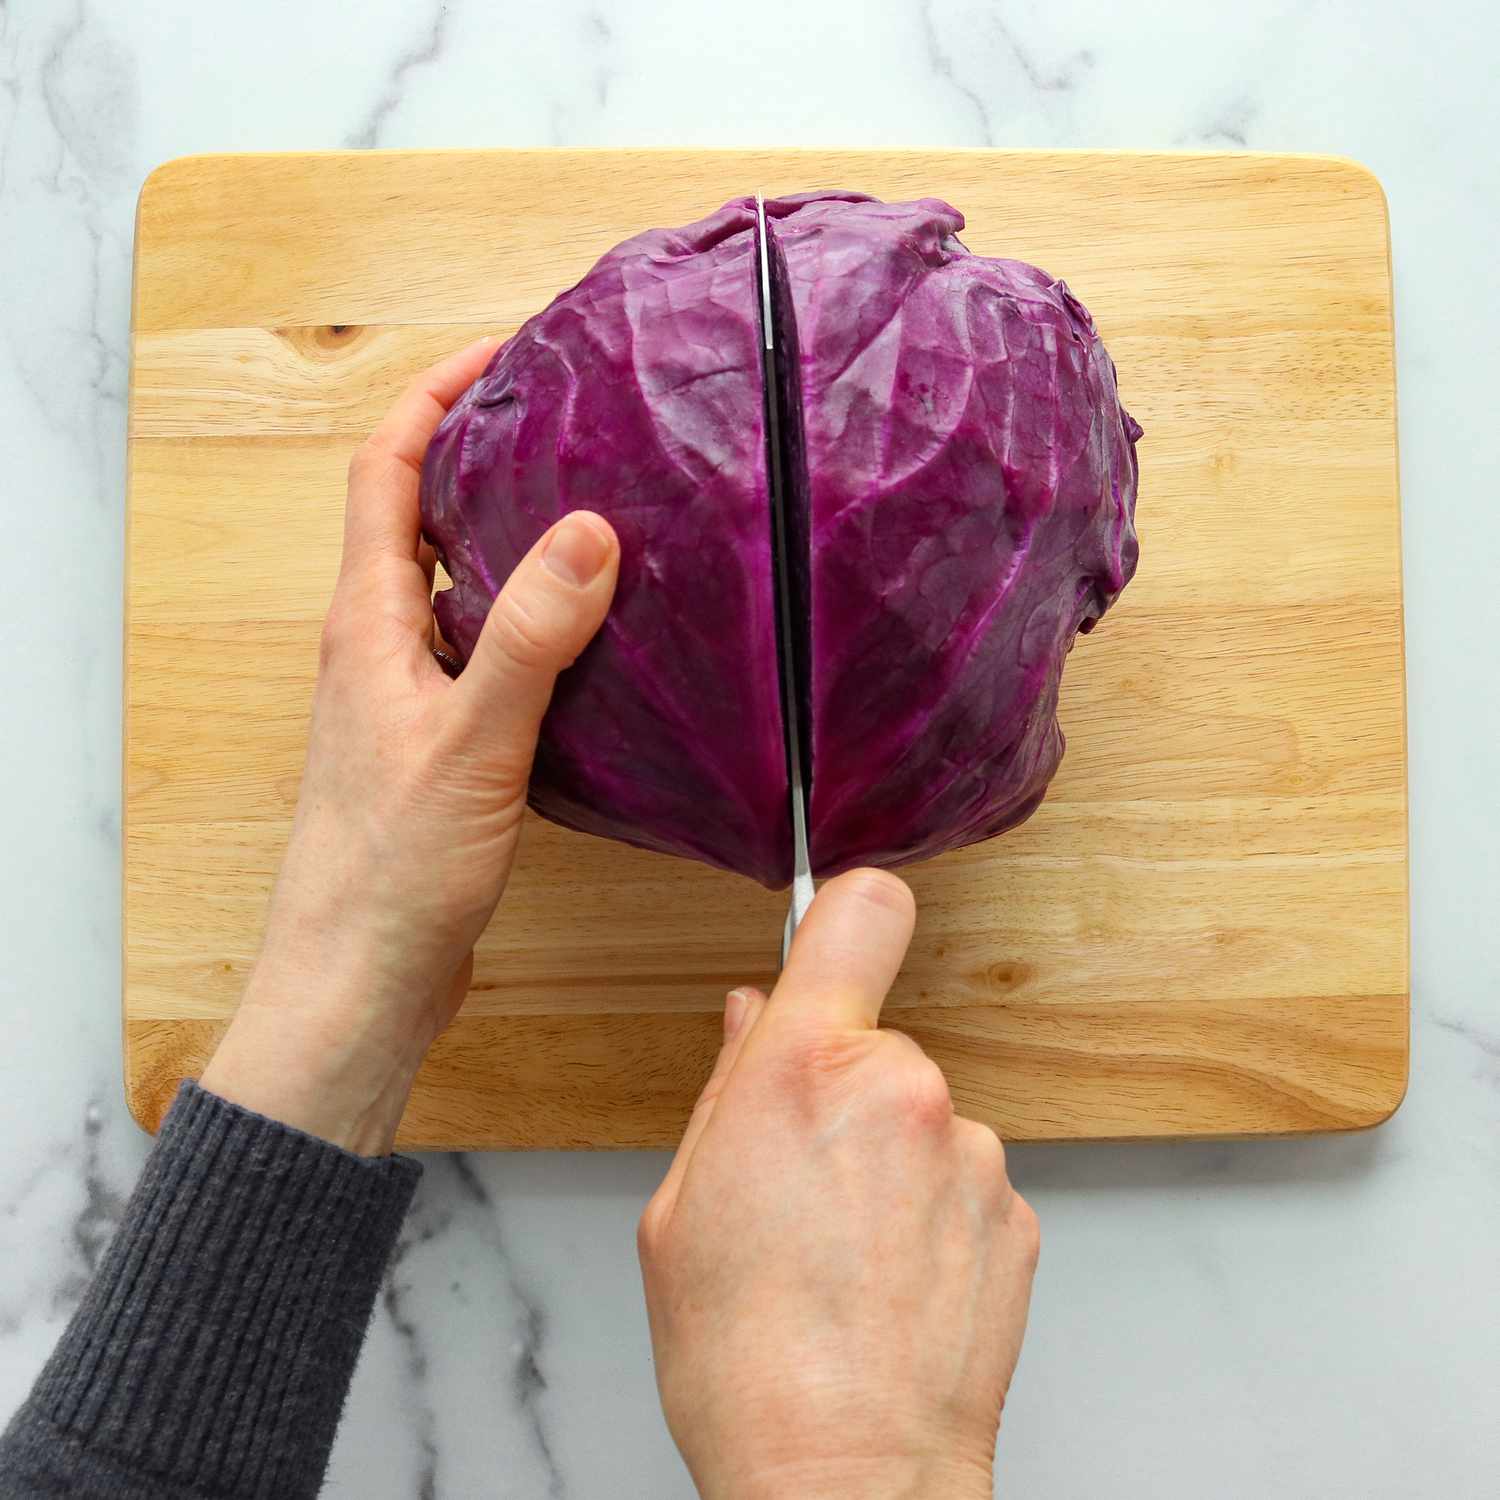 A close up of a head of cabbage being cut in half